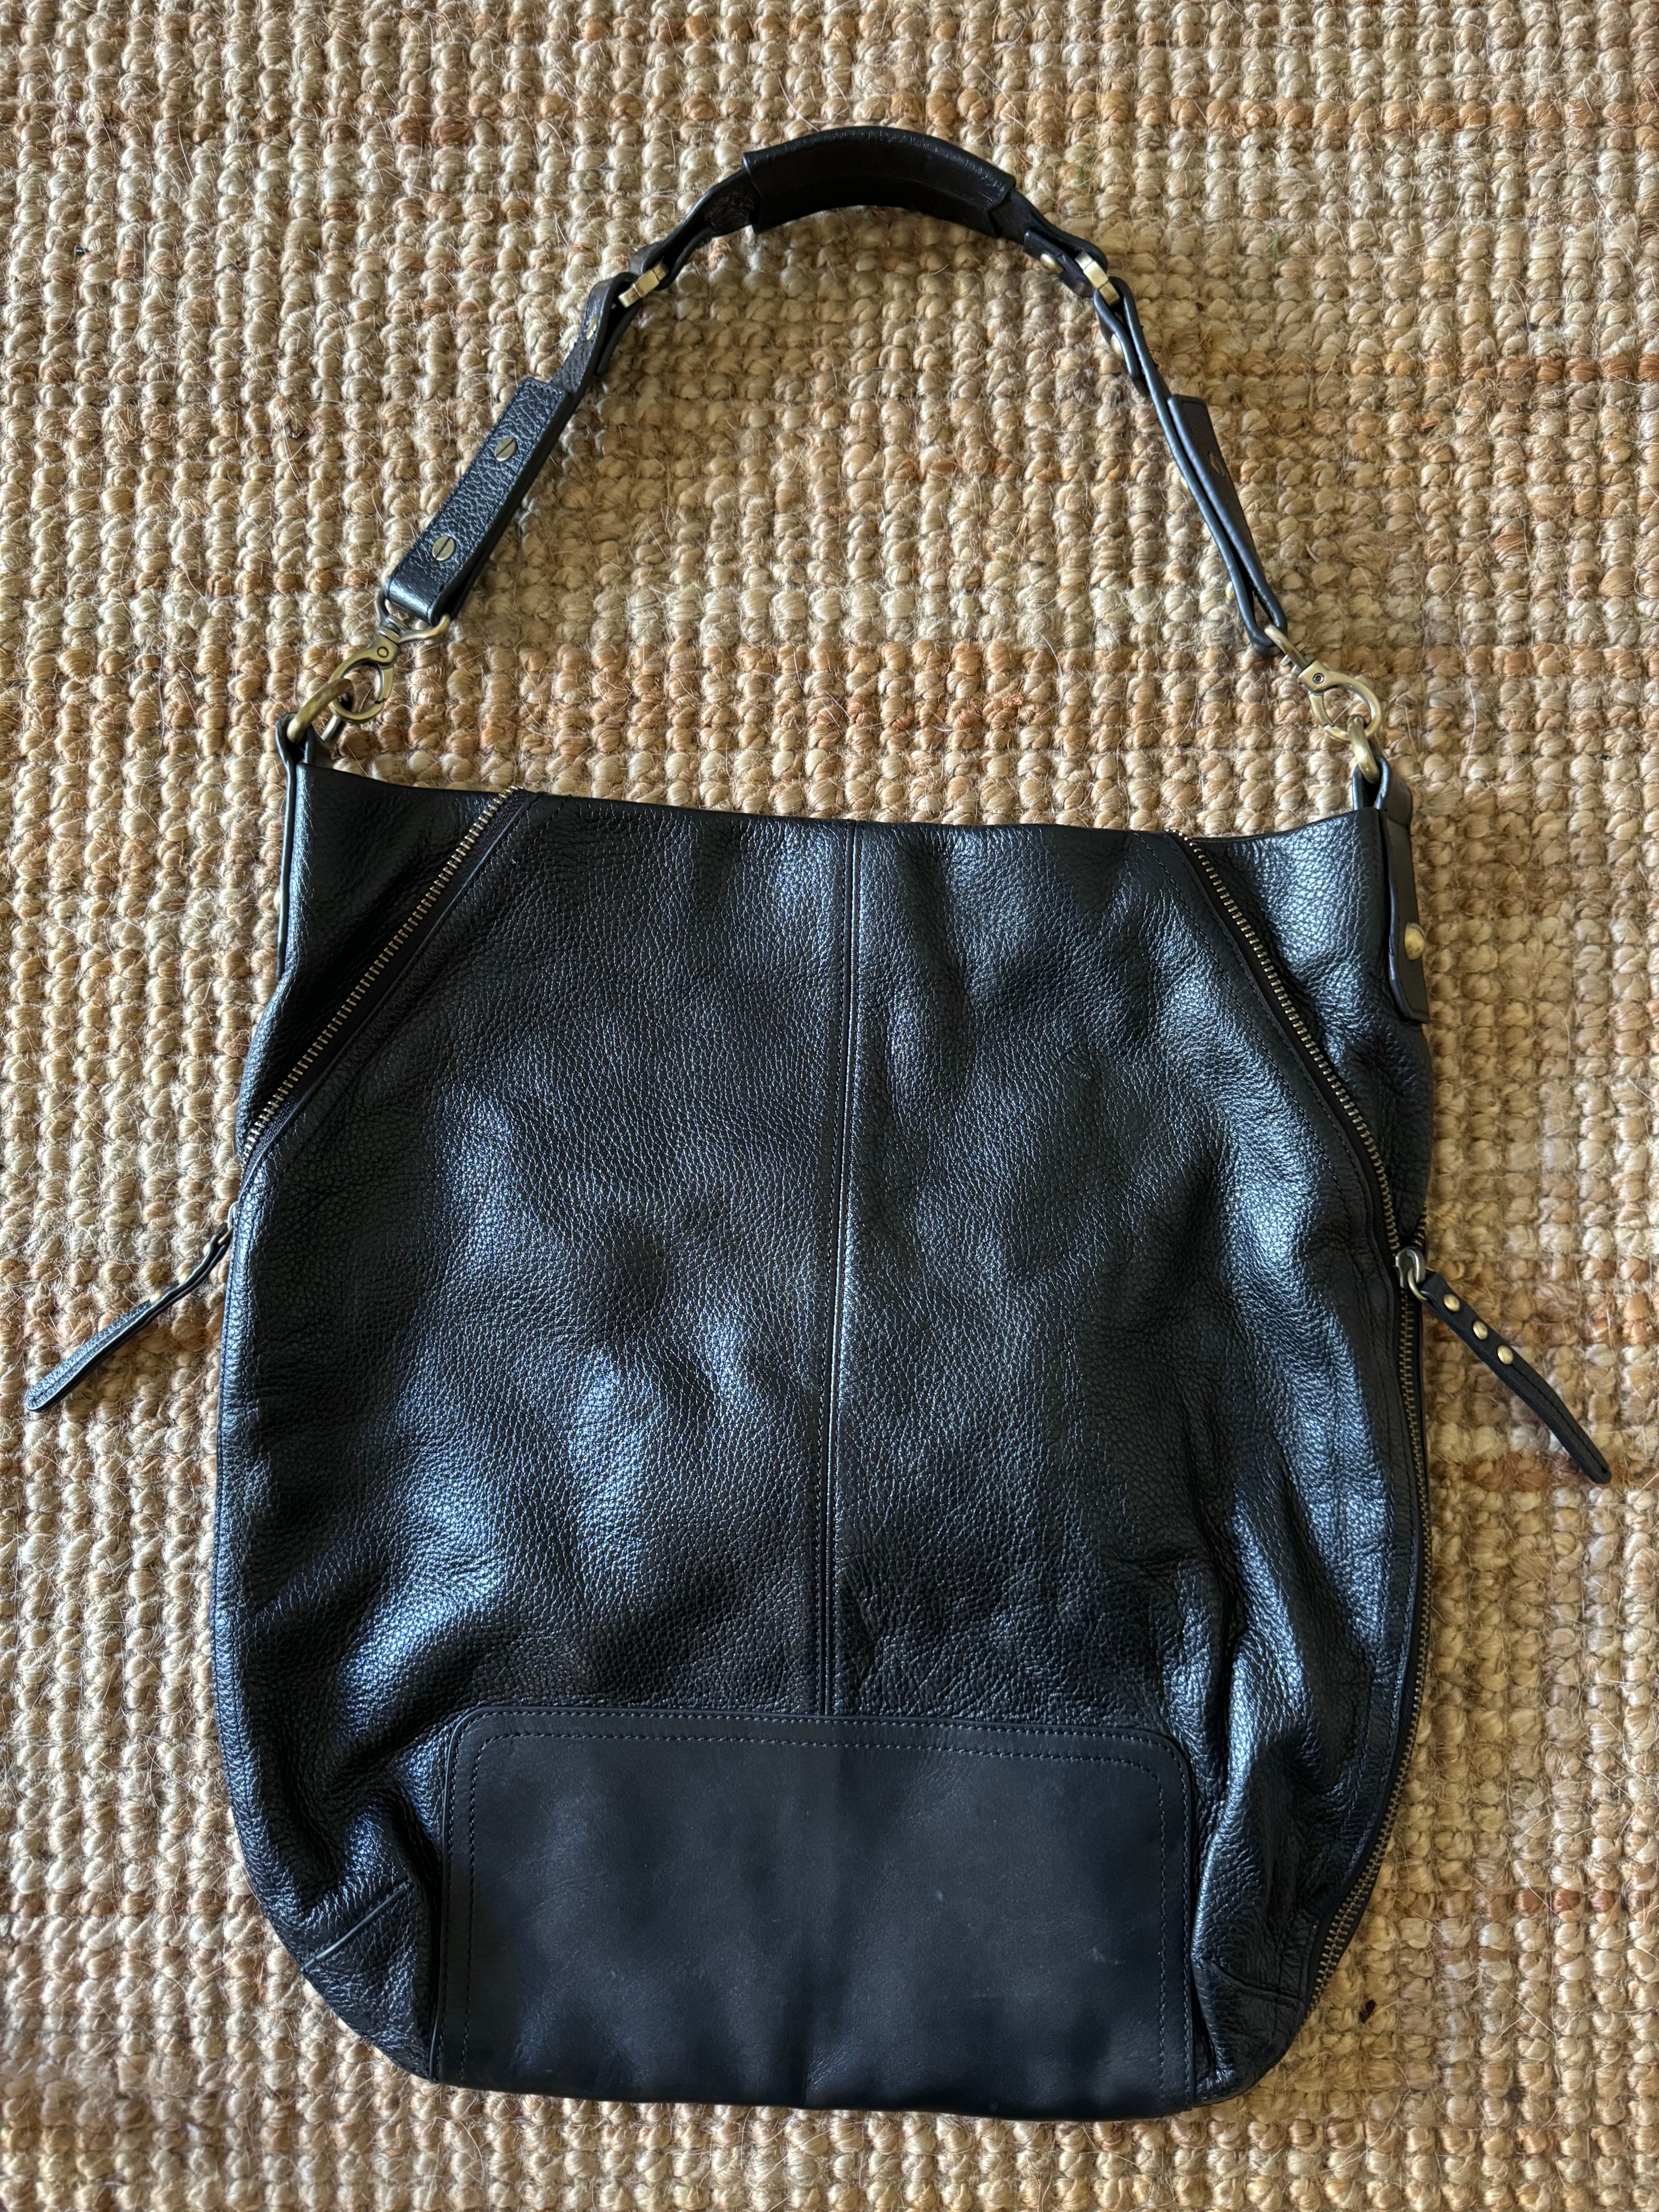 Pre-loved Status Anxiety The Lair Hobo Bag